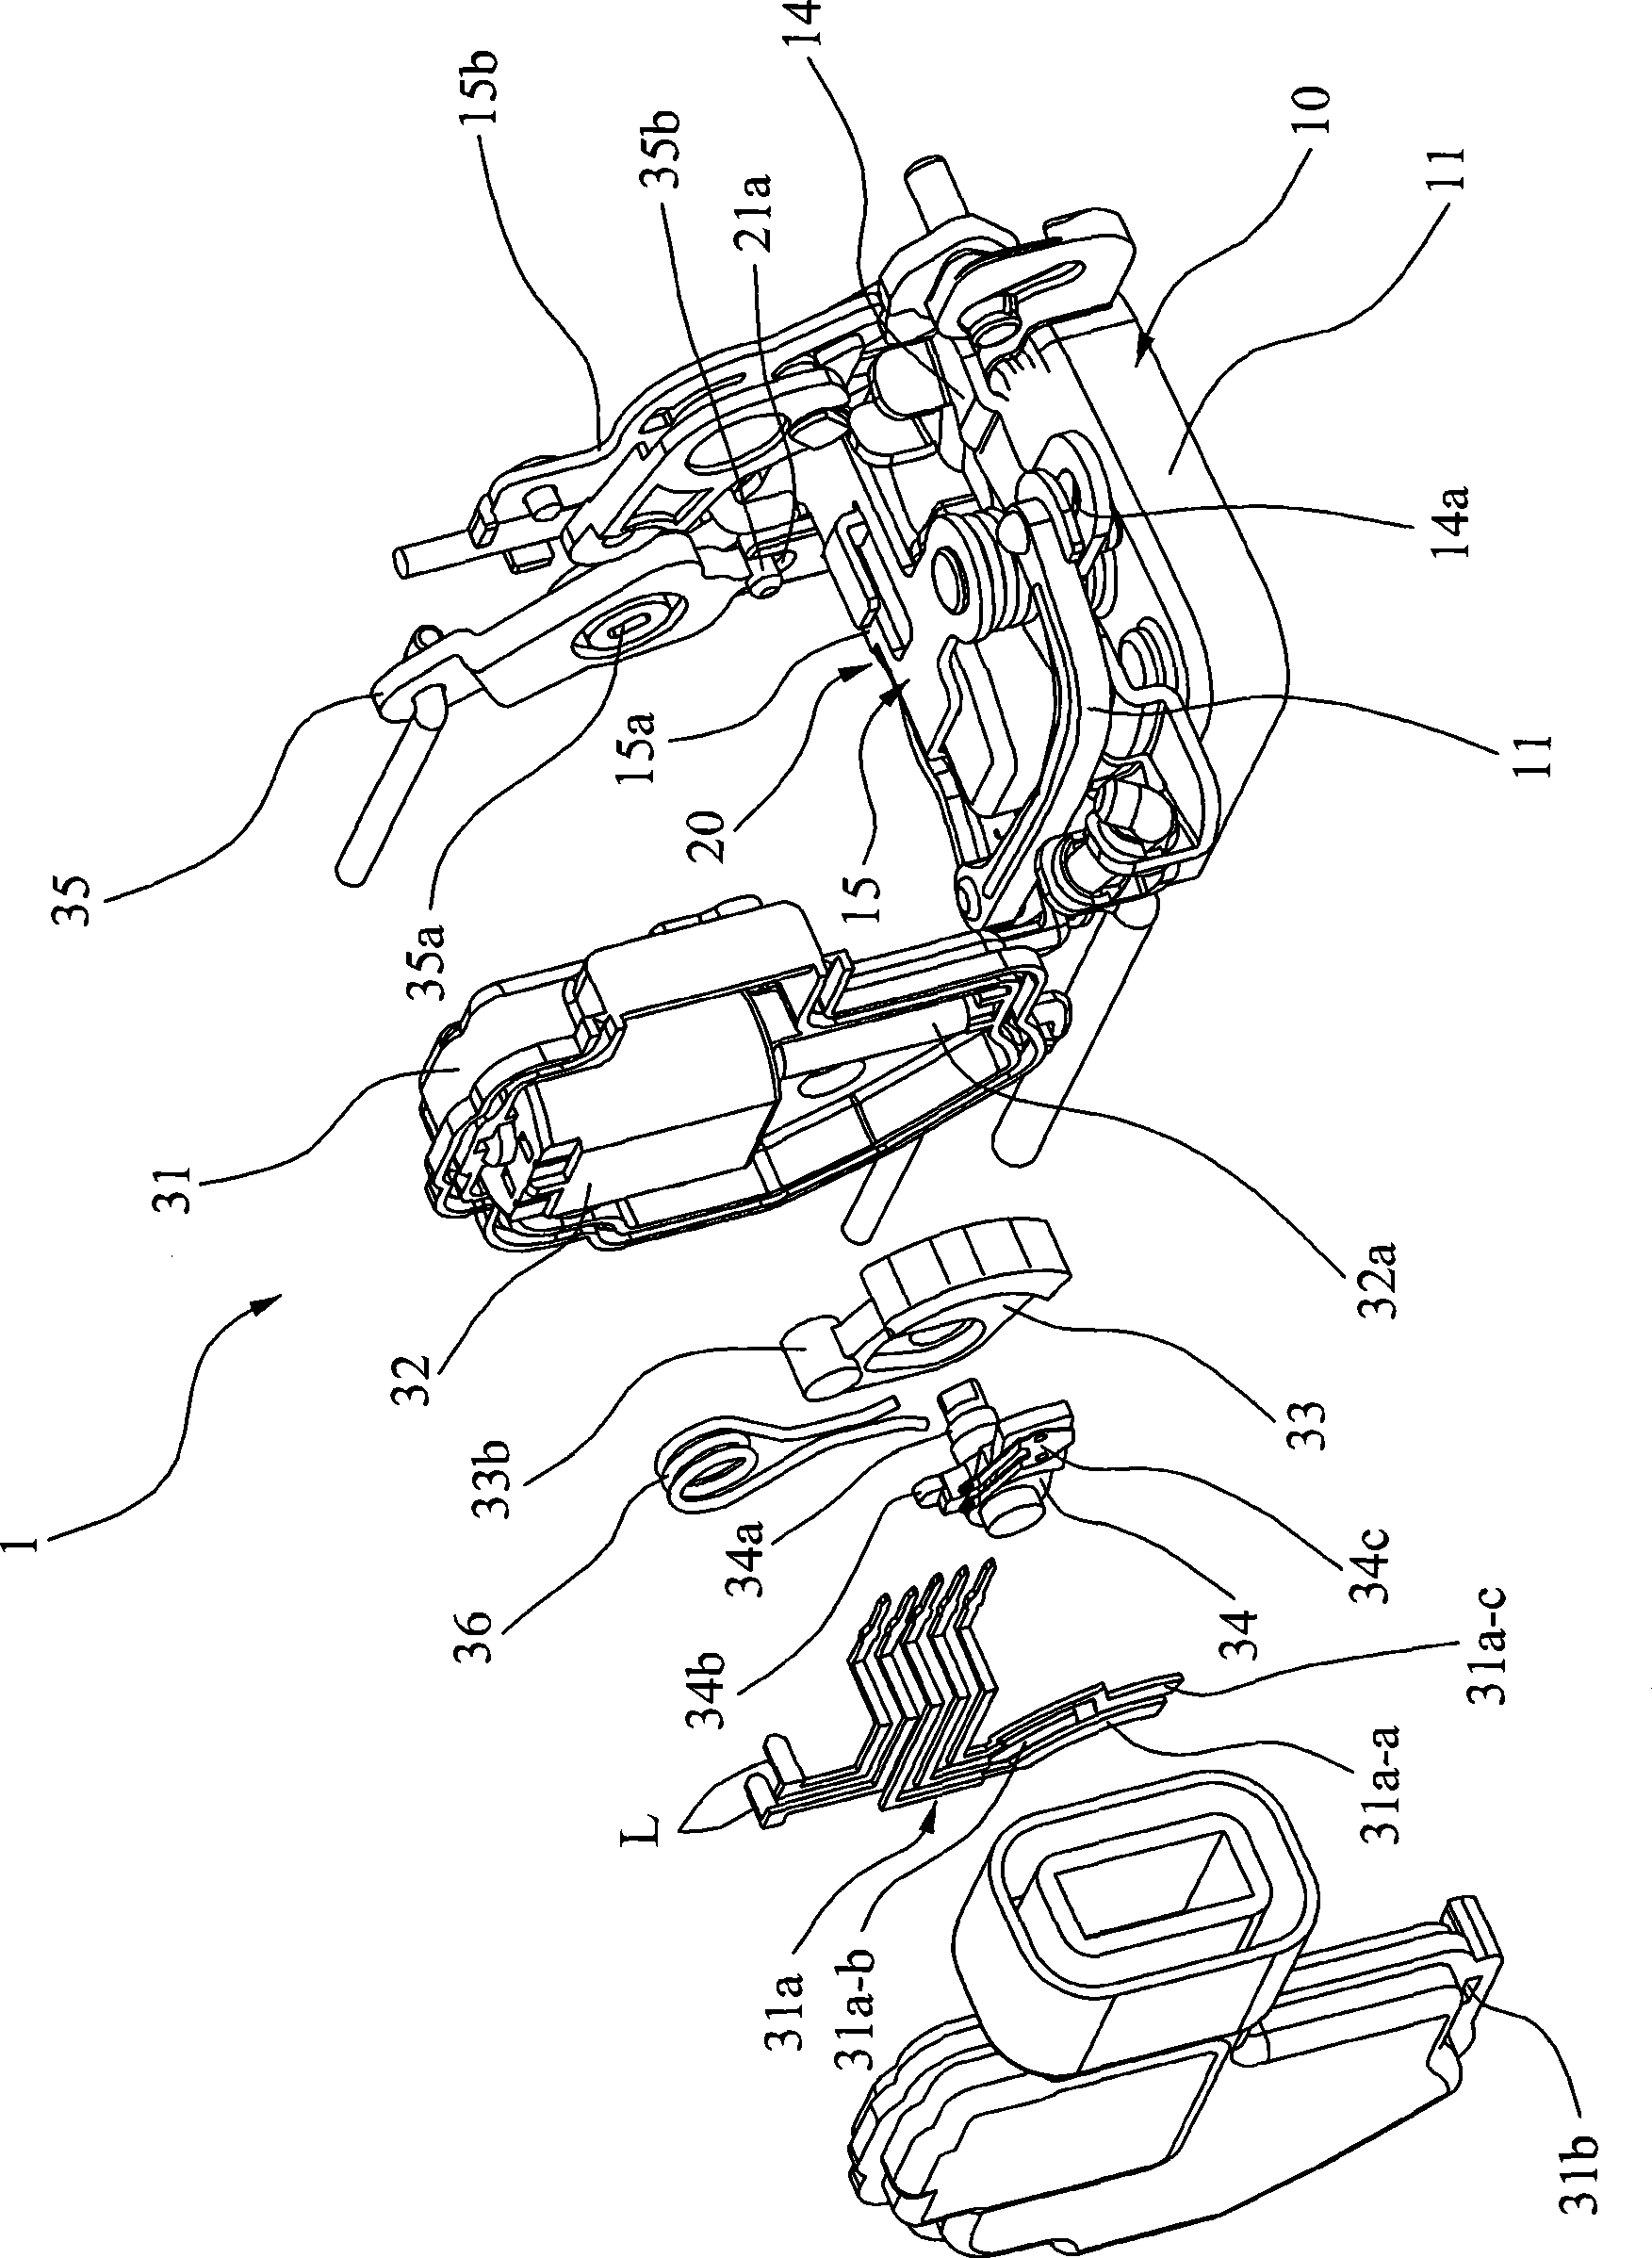 Actuator with simple structure used for door locking device